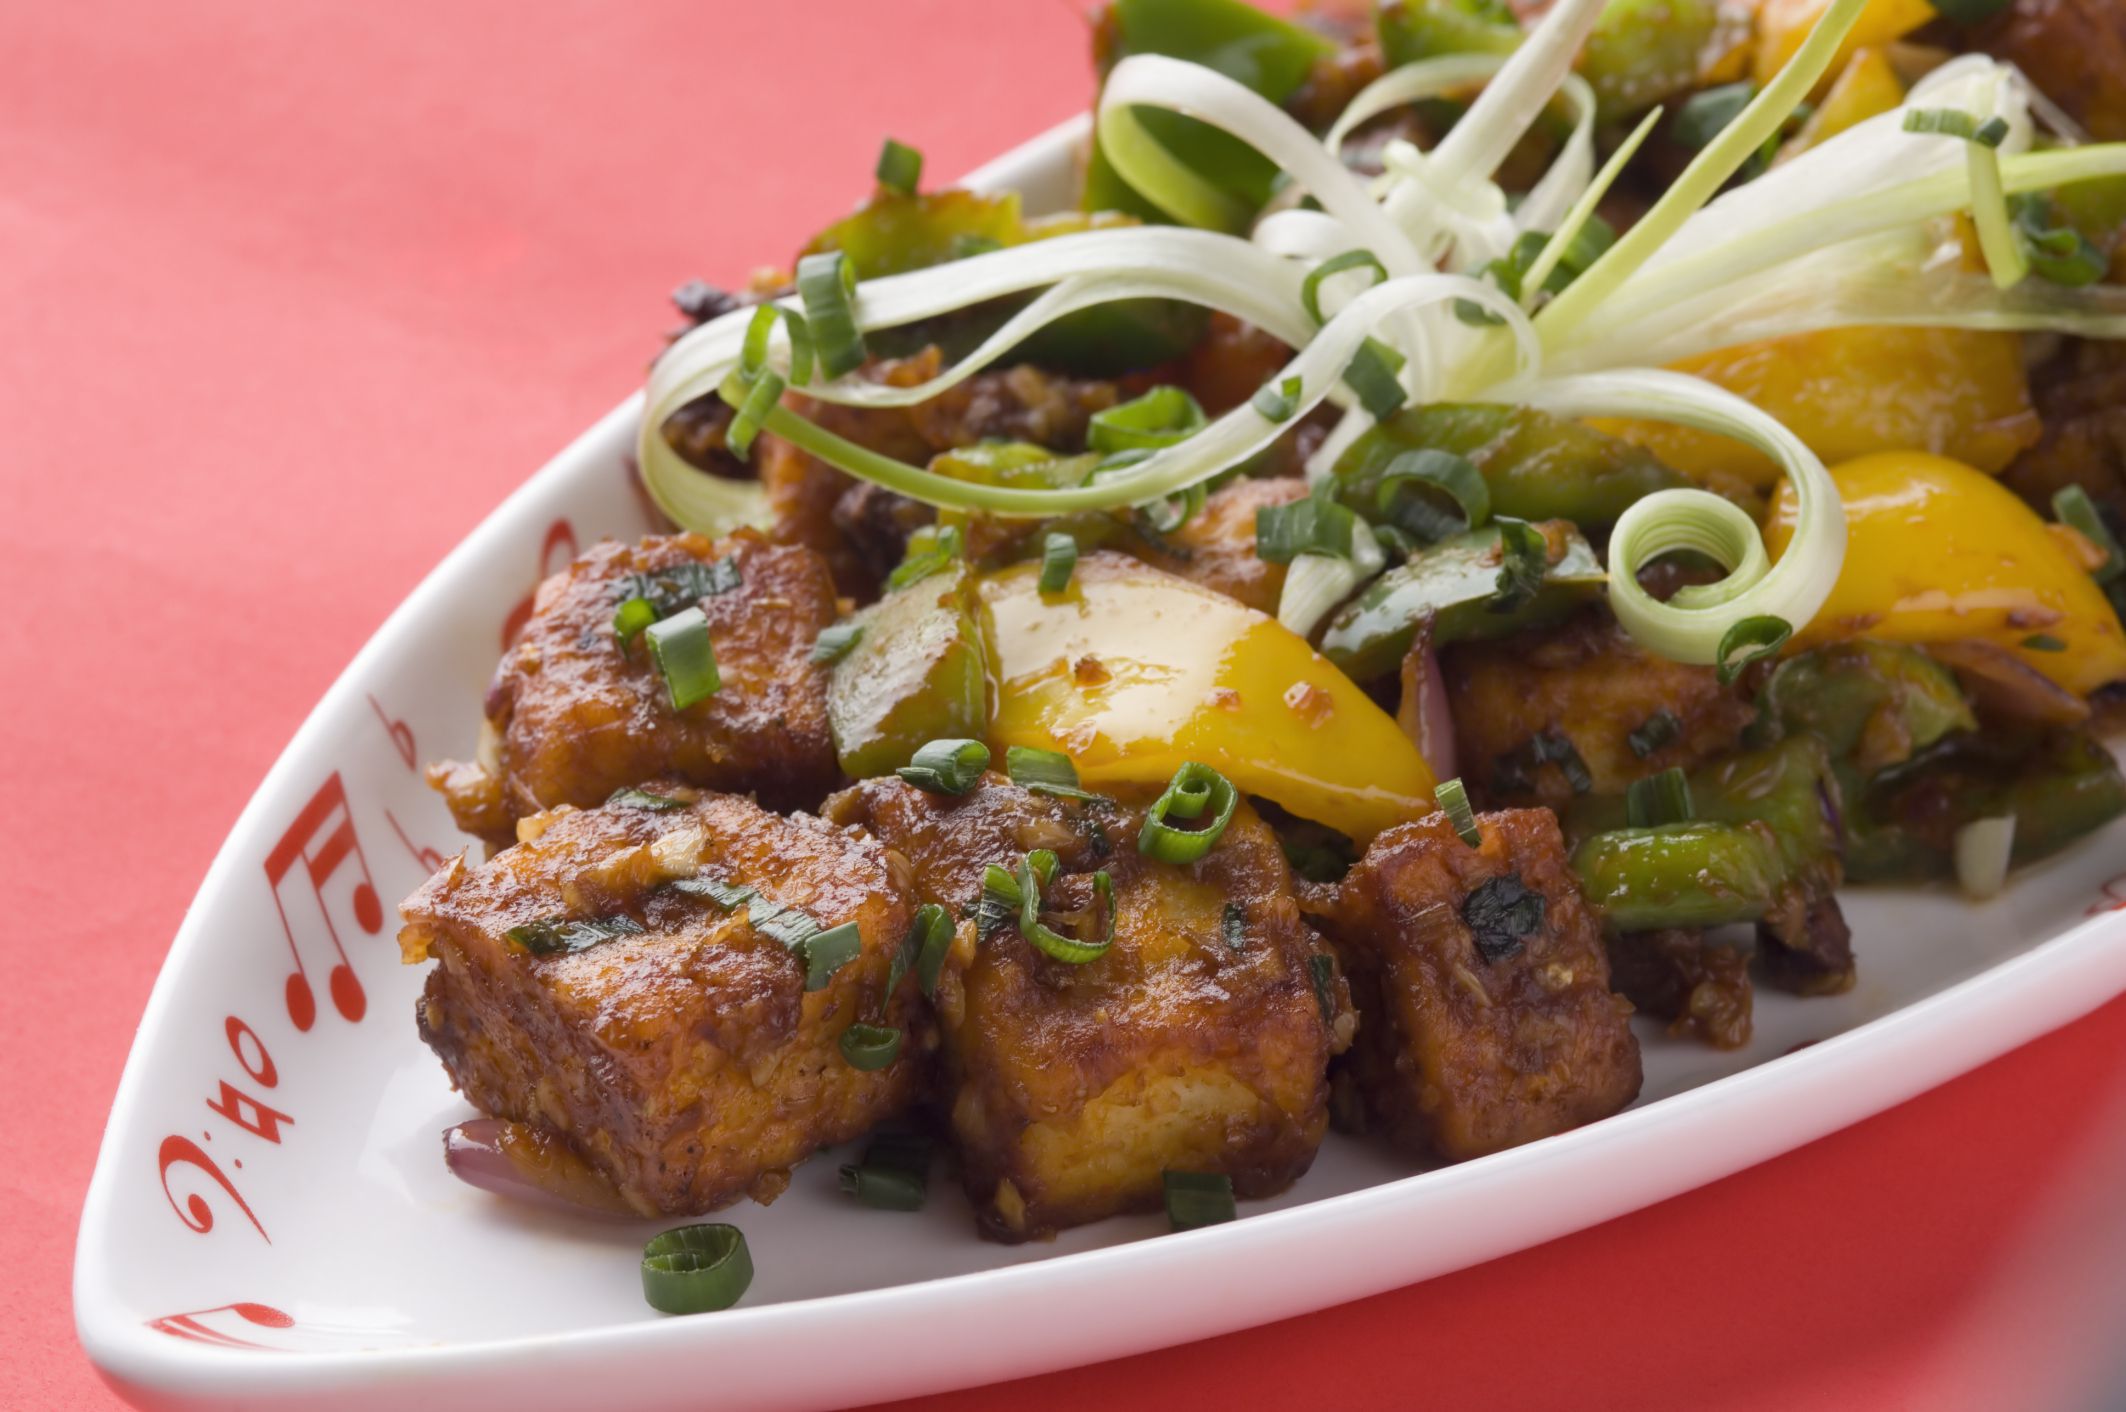 Chili Paneer – Hot and Sour Stir Fried Cottage Cheese